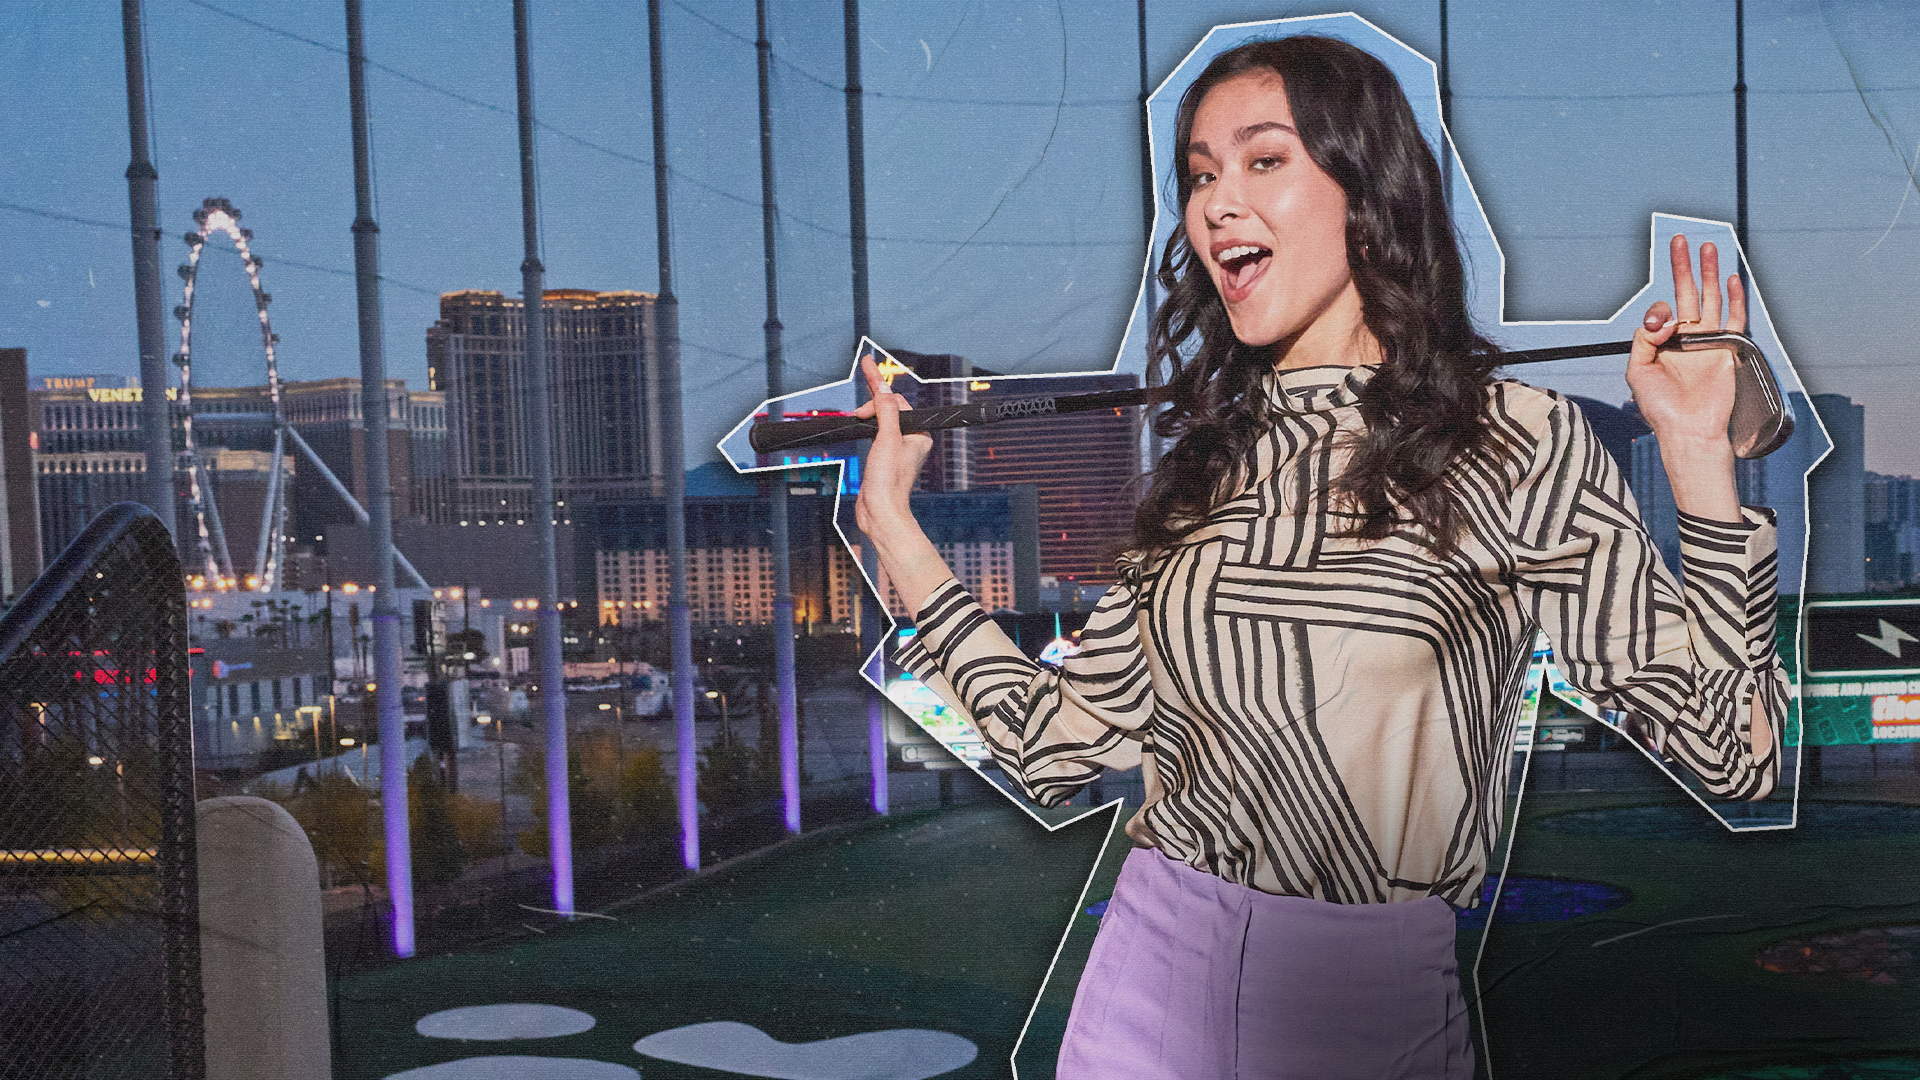 Celebrate New Year’s Eve at Topgolf